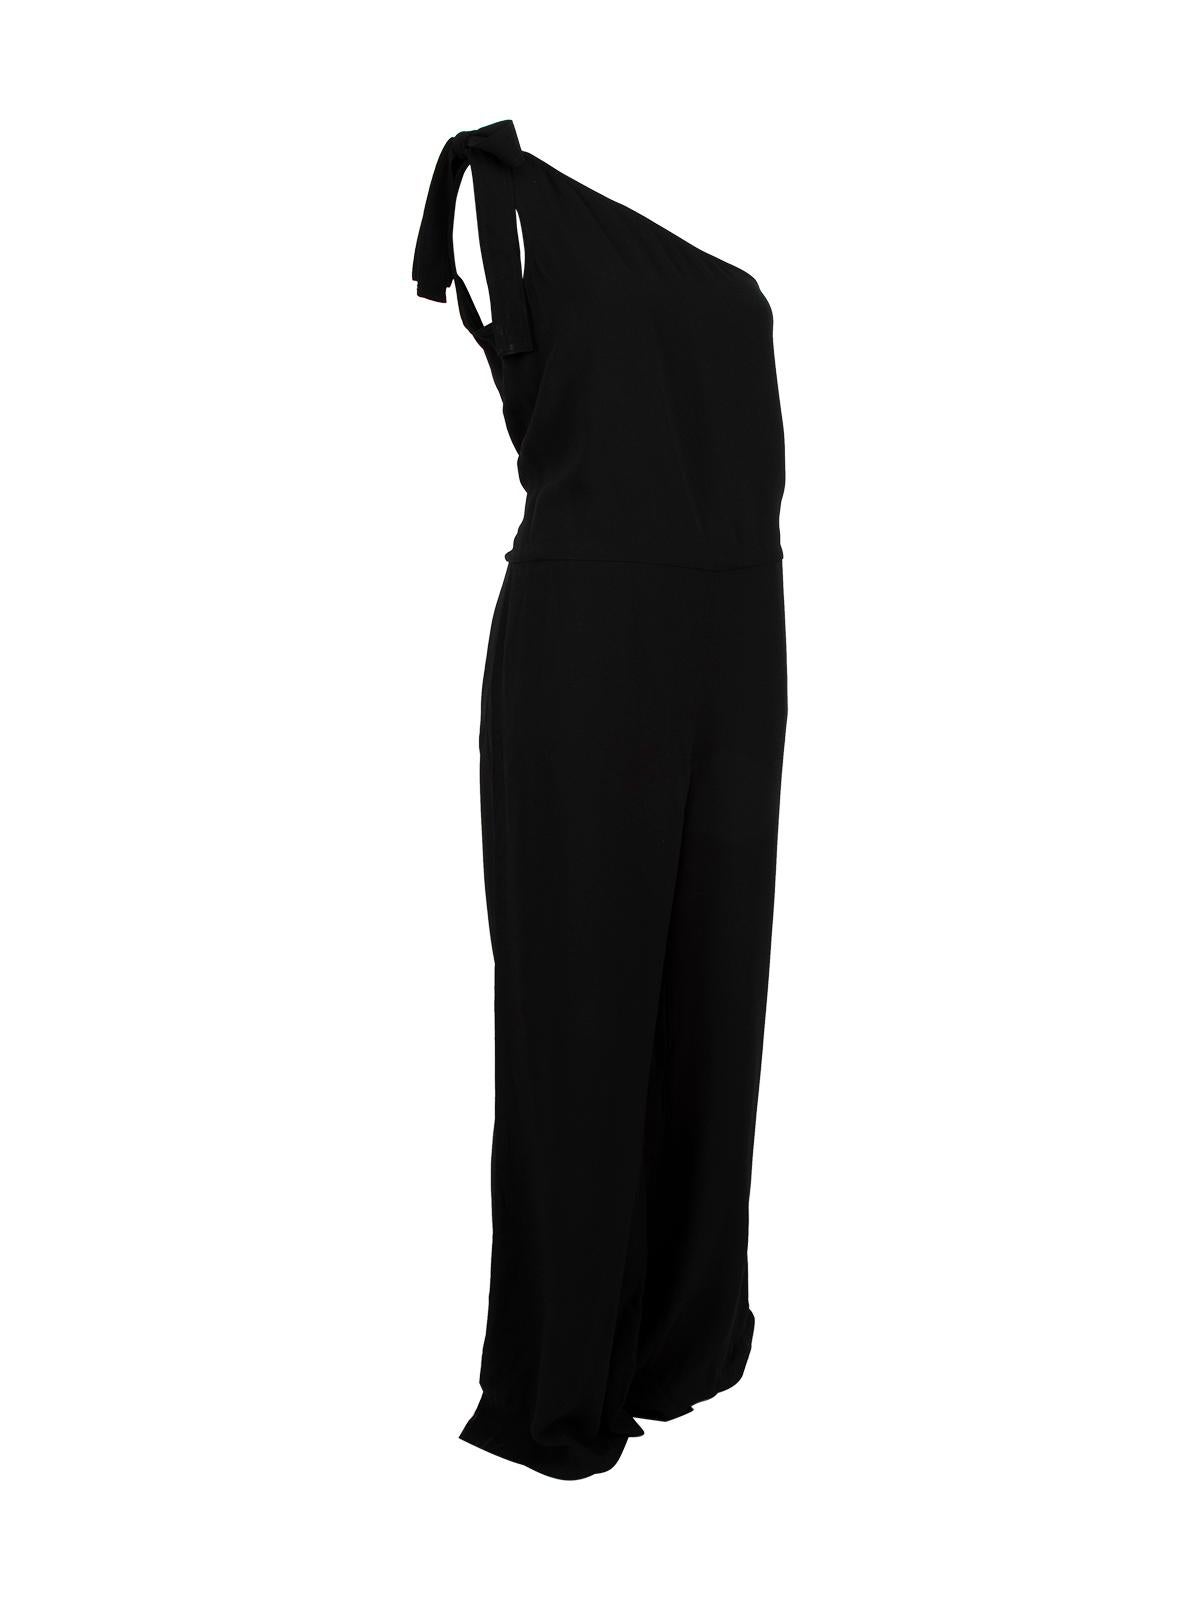 CONDITION is Very good. Minimal wear to jumpsuit is evident. Minimal wear to bottom of pant leg and few loose threads near zip on this used Theory designer resale item. Details Black Acetate One shoulder Bow tie should fastening Side zip Made in